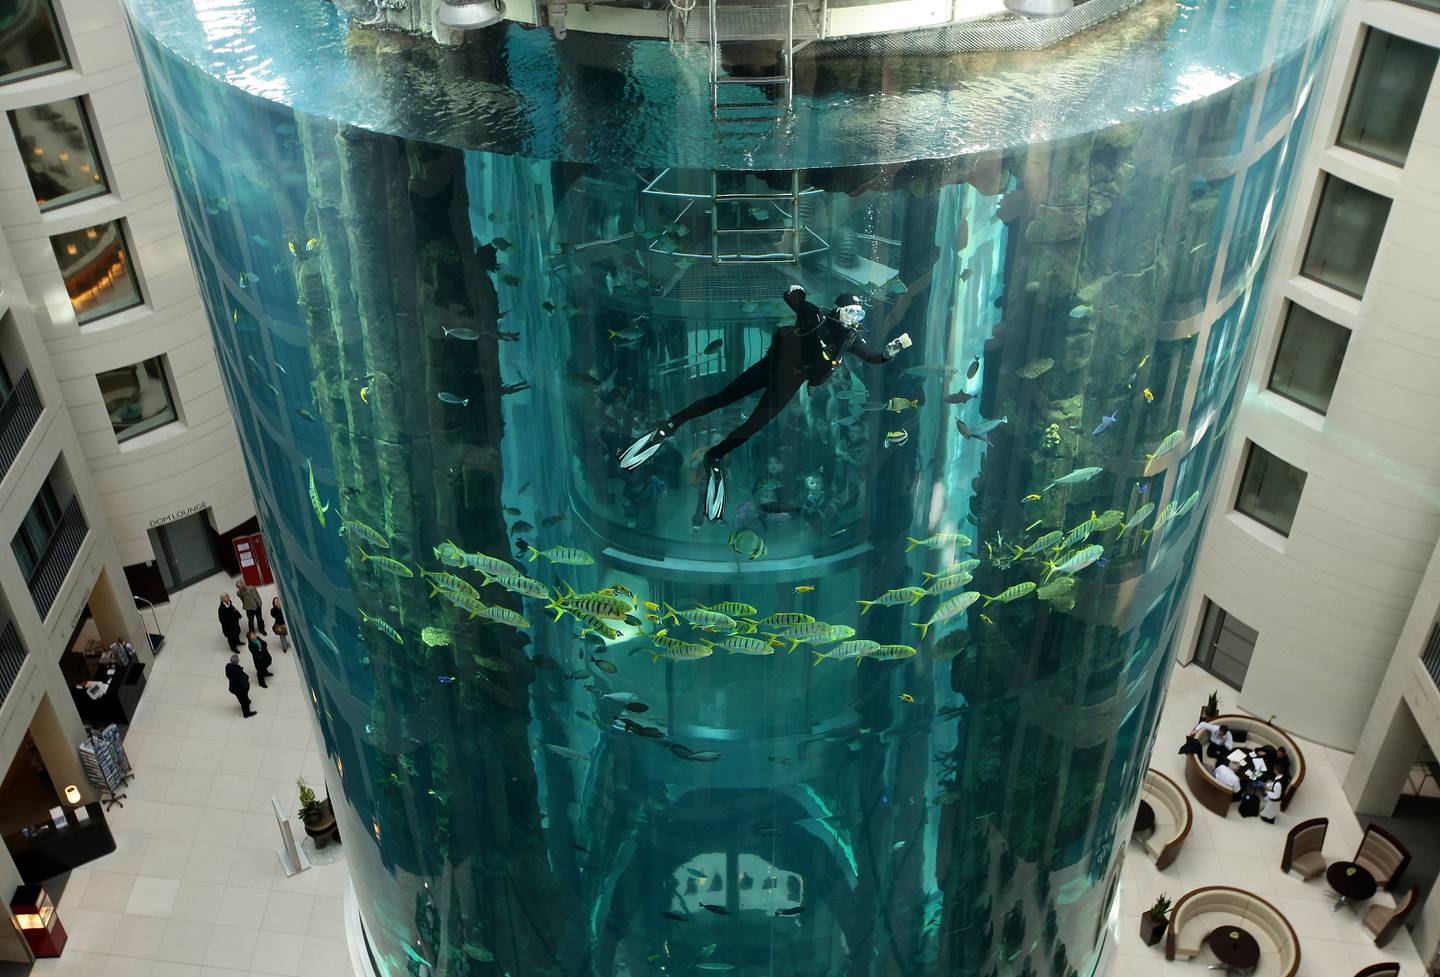 A diver cleaning the aquarium in 2010. Getty Images